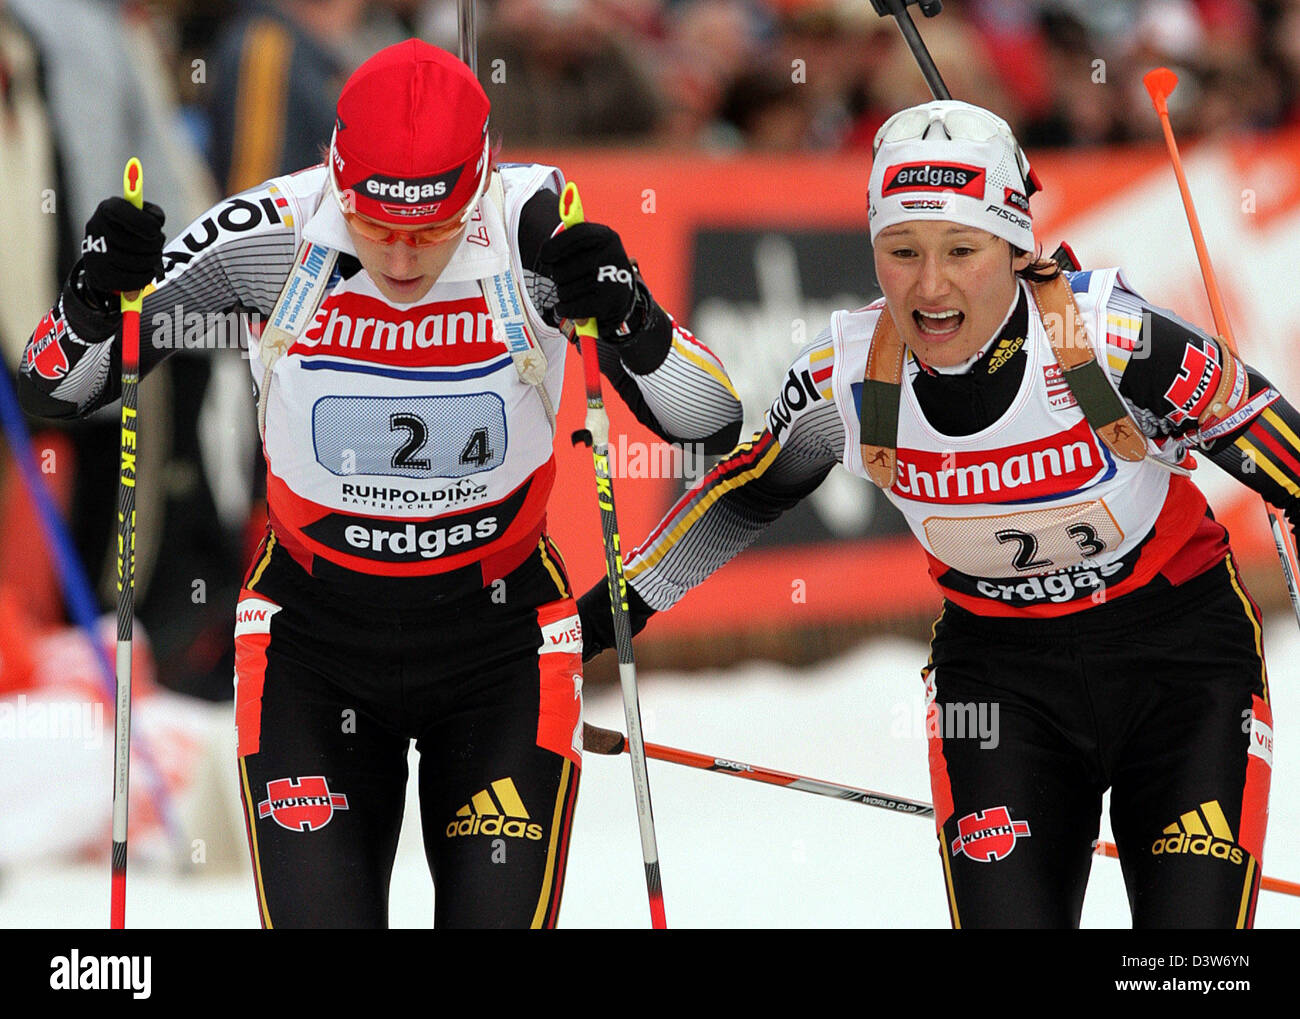 German Kati Wilhelm (L) changes over for Simone Denkinger during the Biathlon World Cup women's 6k relay event in Ruhpolding, Germany, Wednesday, 10 January 2007. Russia produced the finest shooting performance of the season to win the fourth World Cup women's relay of the campaign in Ruhpolding ahead of the German team. Photo: Andreas Gebert Stock Photo